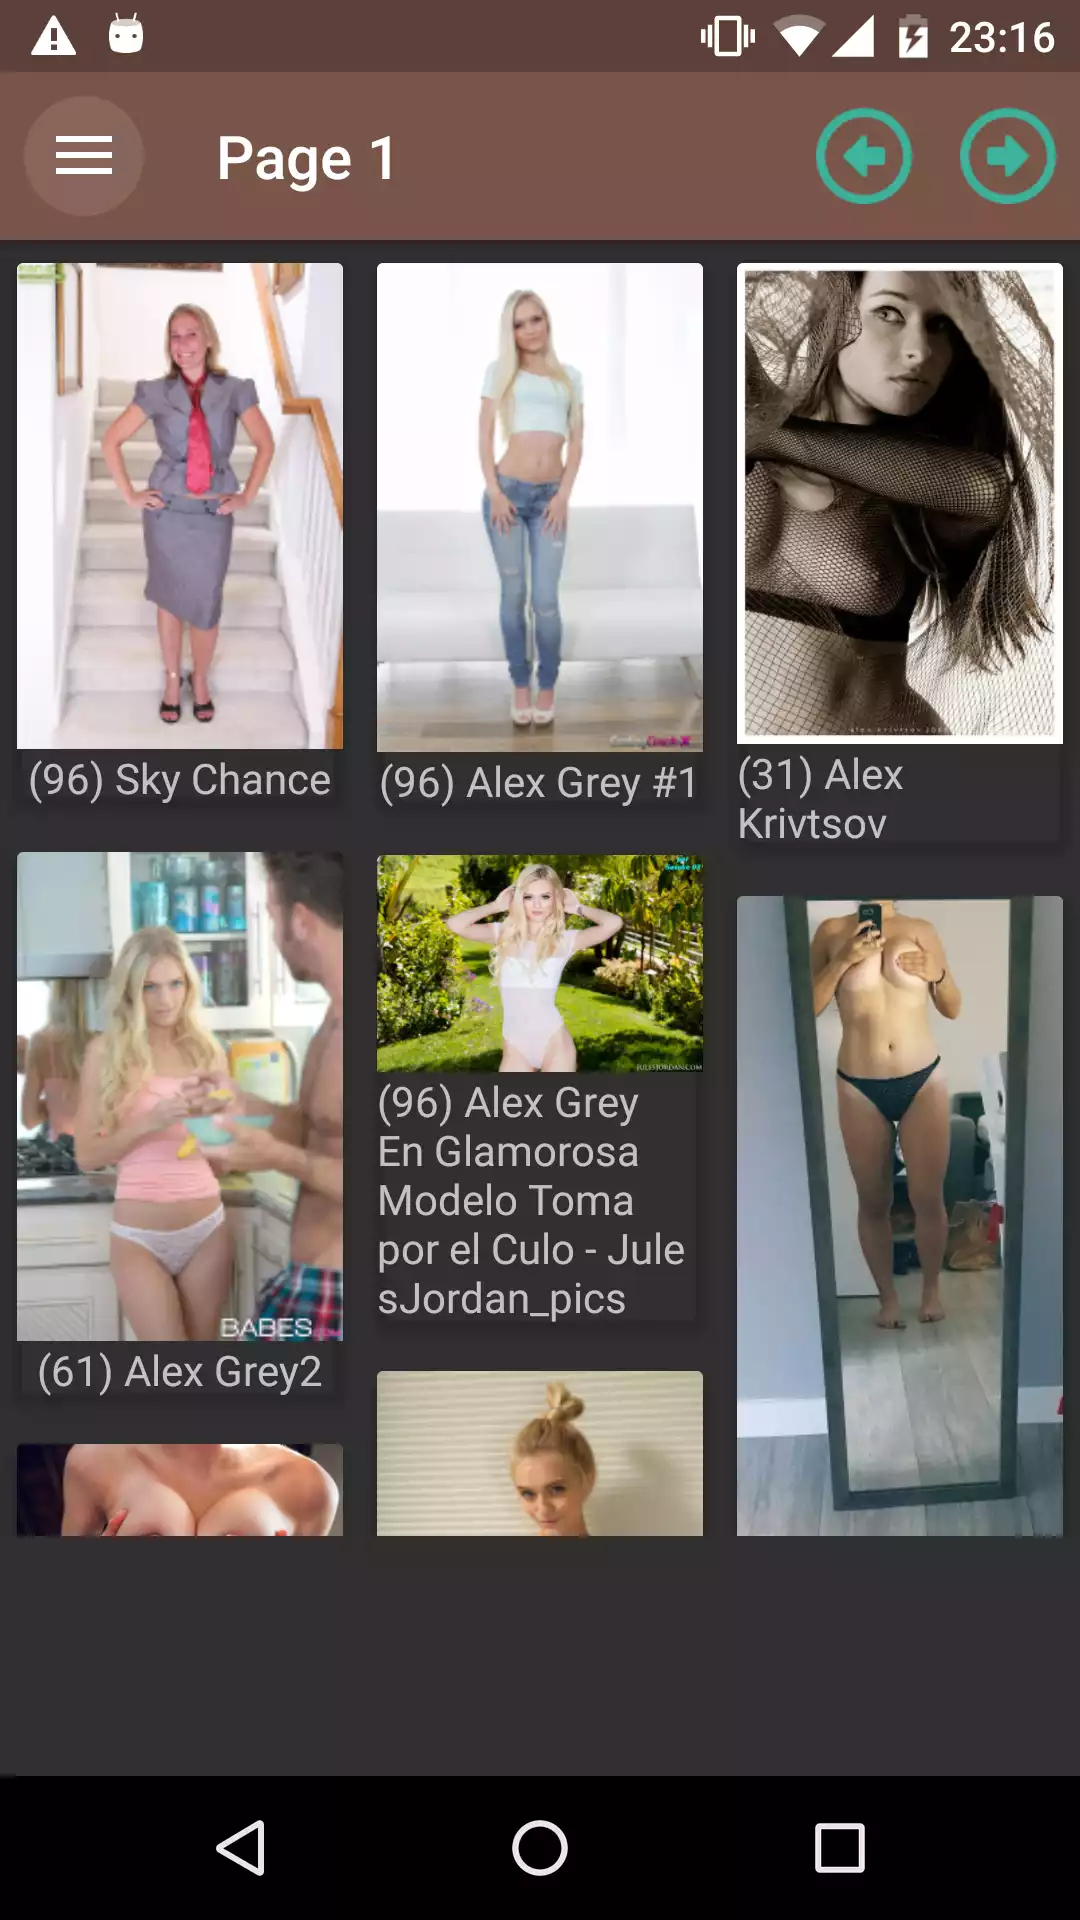 alex-chance sexy,gomez,pics,android,henta,pic,upskirt,erotic,phone,app,wallpapers,hentia,for,ebony,esperanza,apps,galleries,nhentai,hentai,wallpaper,backgrounds,updates,porn,anime